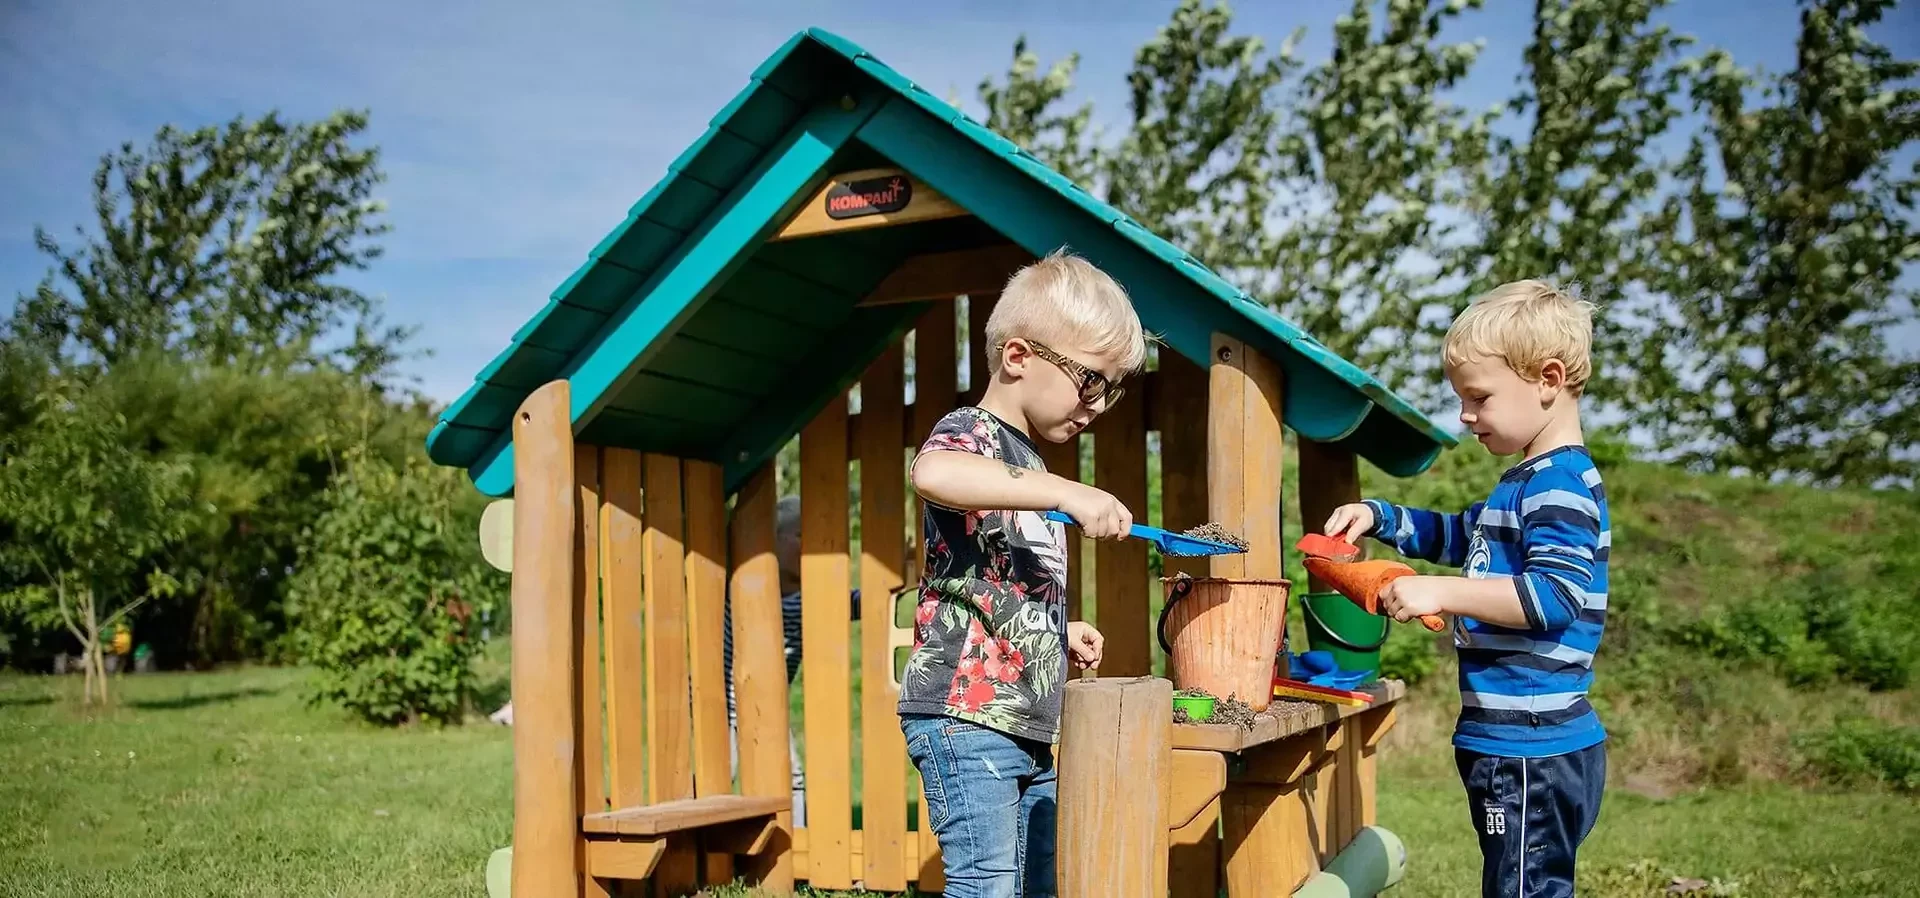 children playing on a wooden playhut playhouses playground hero image